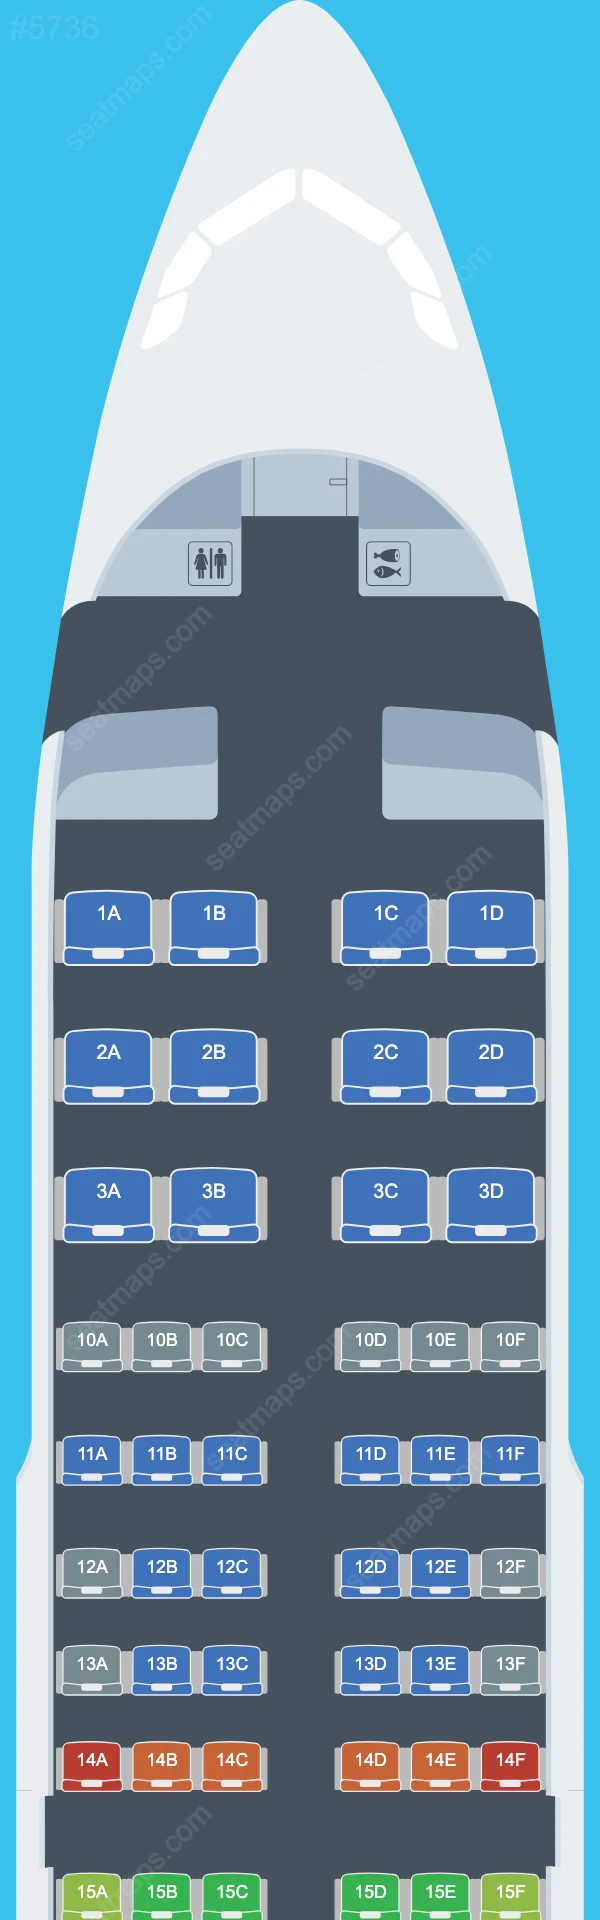 Delta Airbus A319 Seat Maps A319-100 V.2